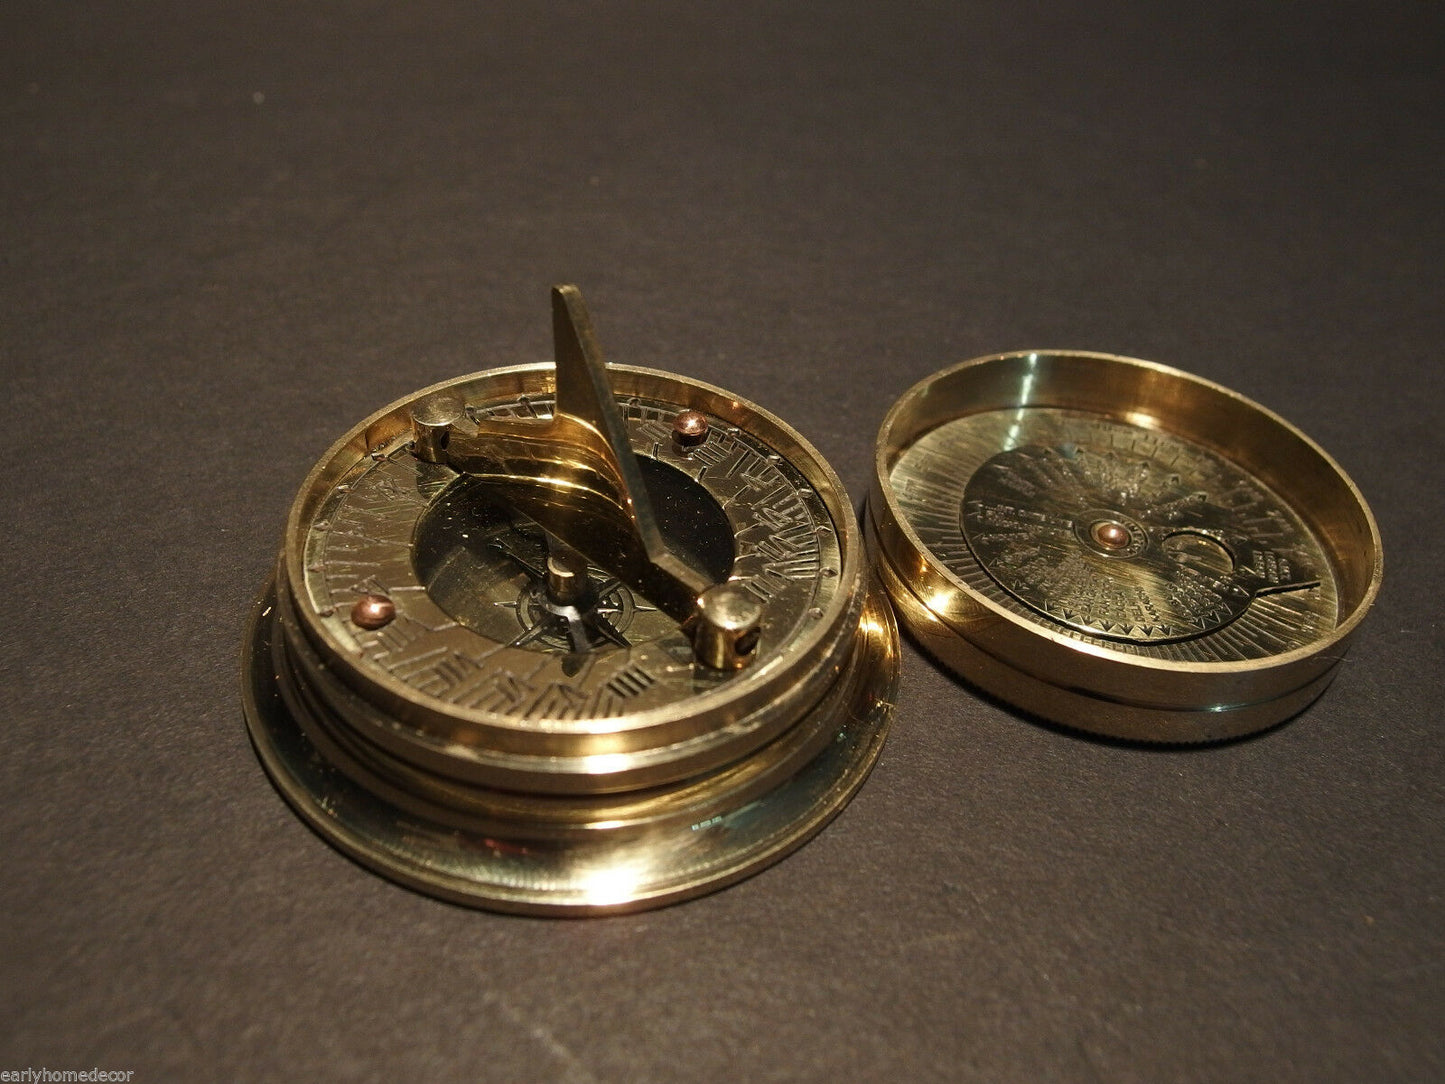 Antique Style Solid Brass Wing Sundial w Lid Pocket Watch Compass - Early Home Decor